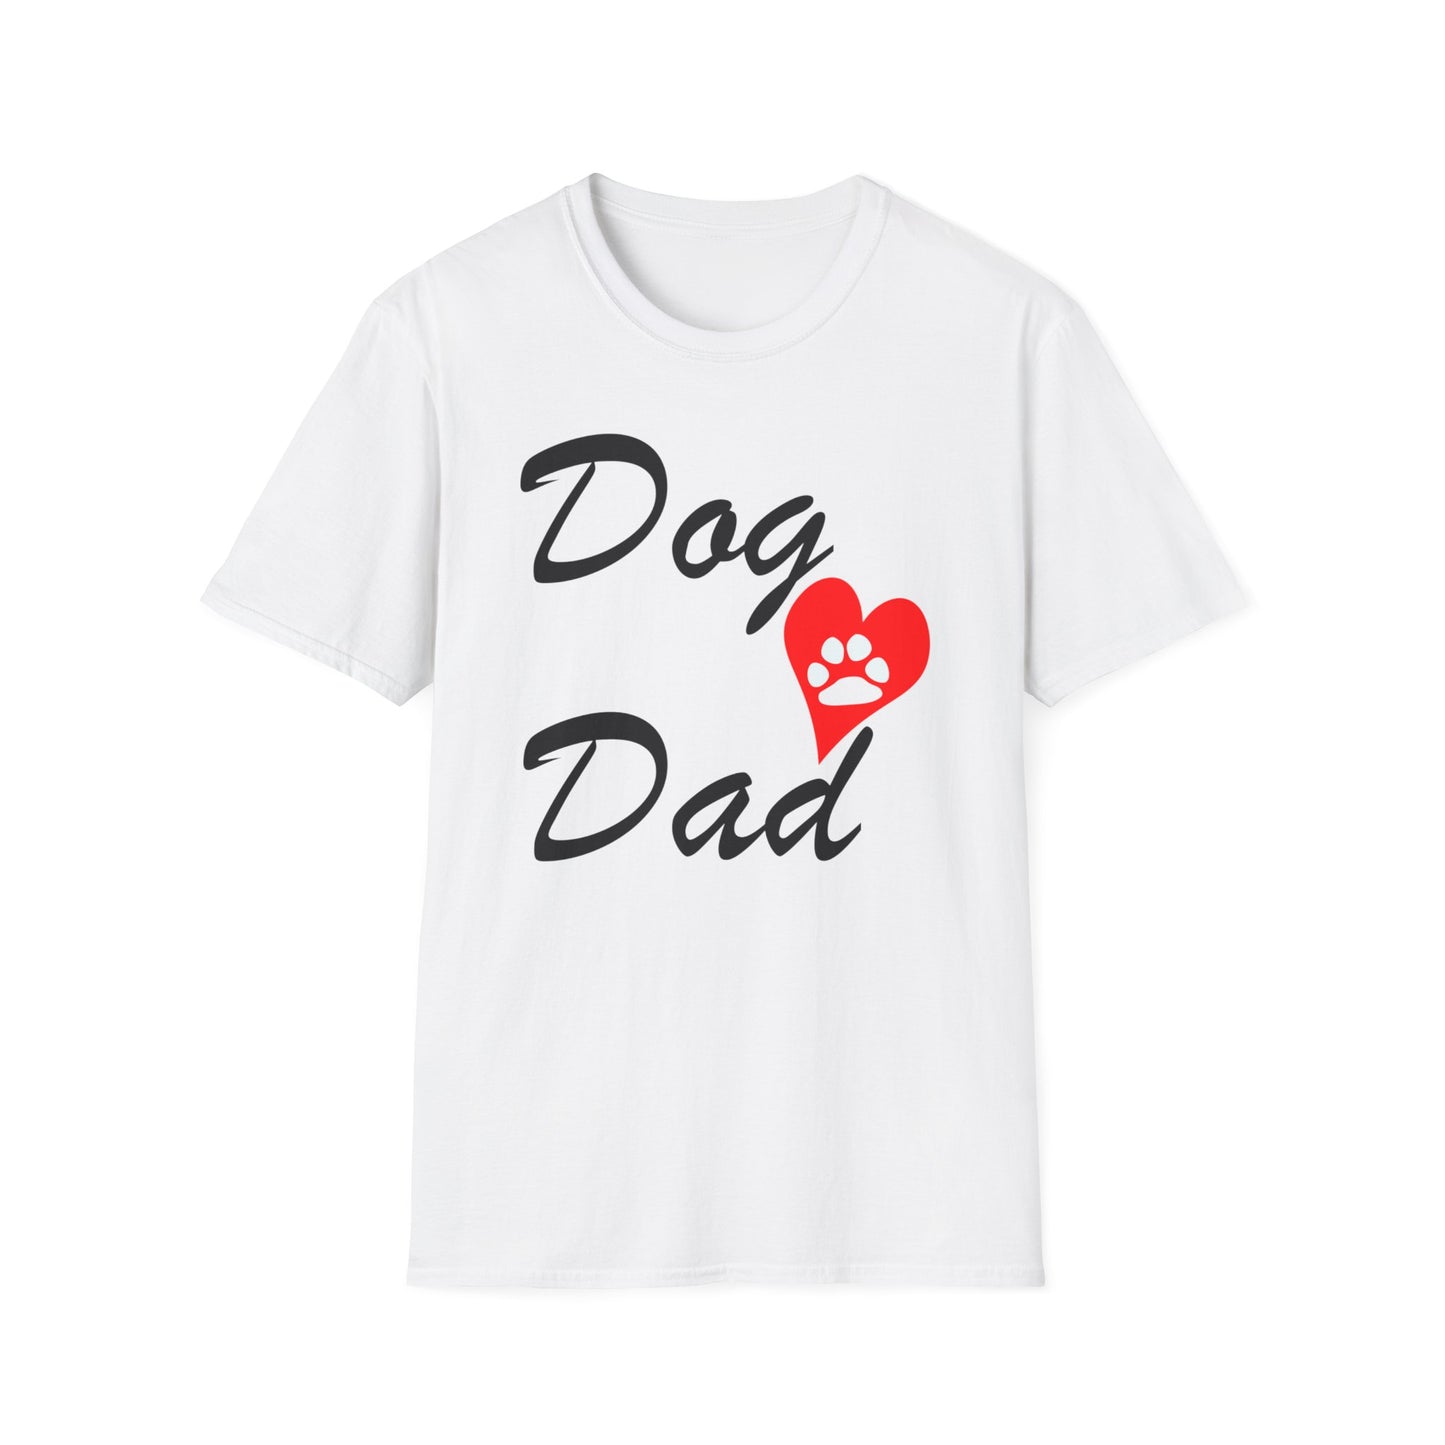 A white t-shirt with a design of a red heart with a white paw print inside it and the words Dog Dad.